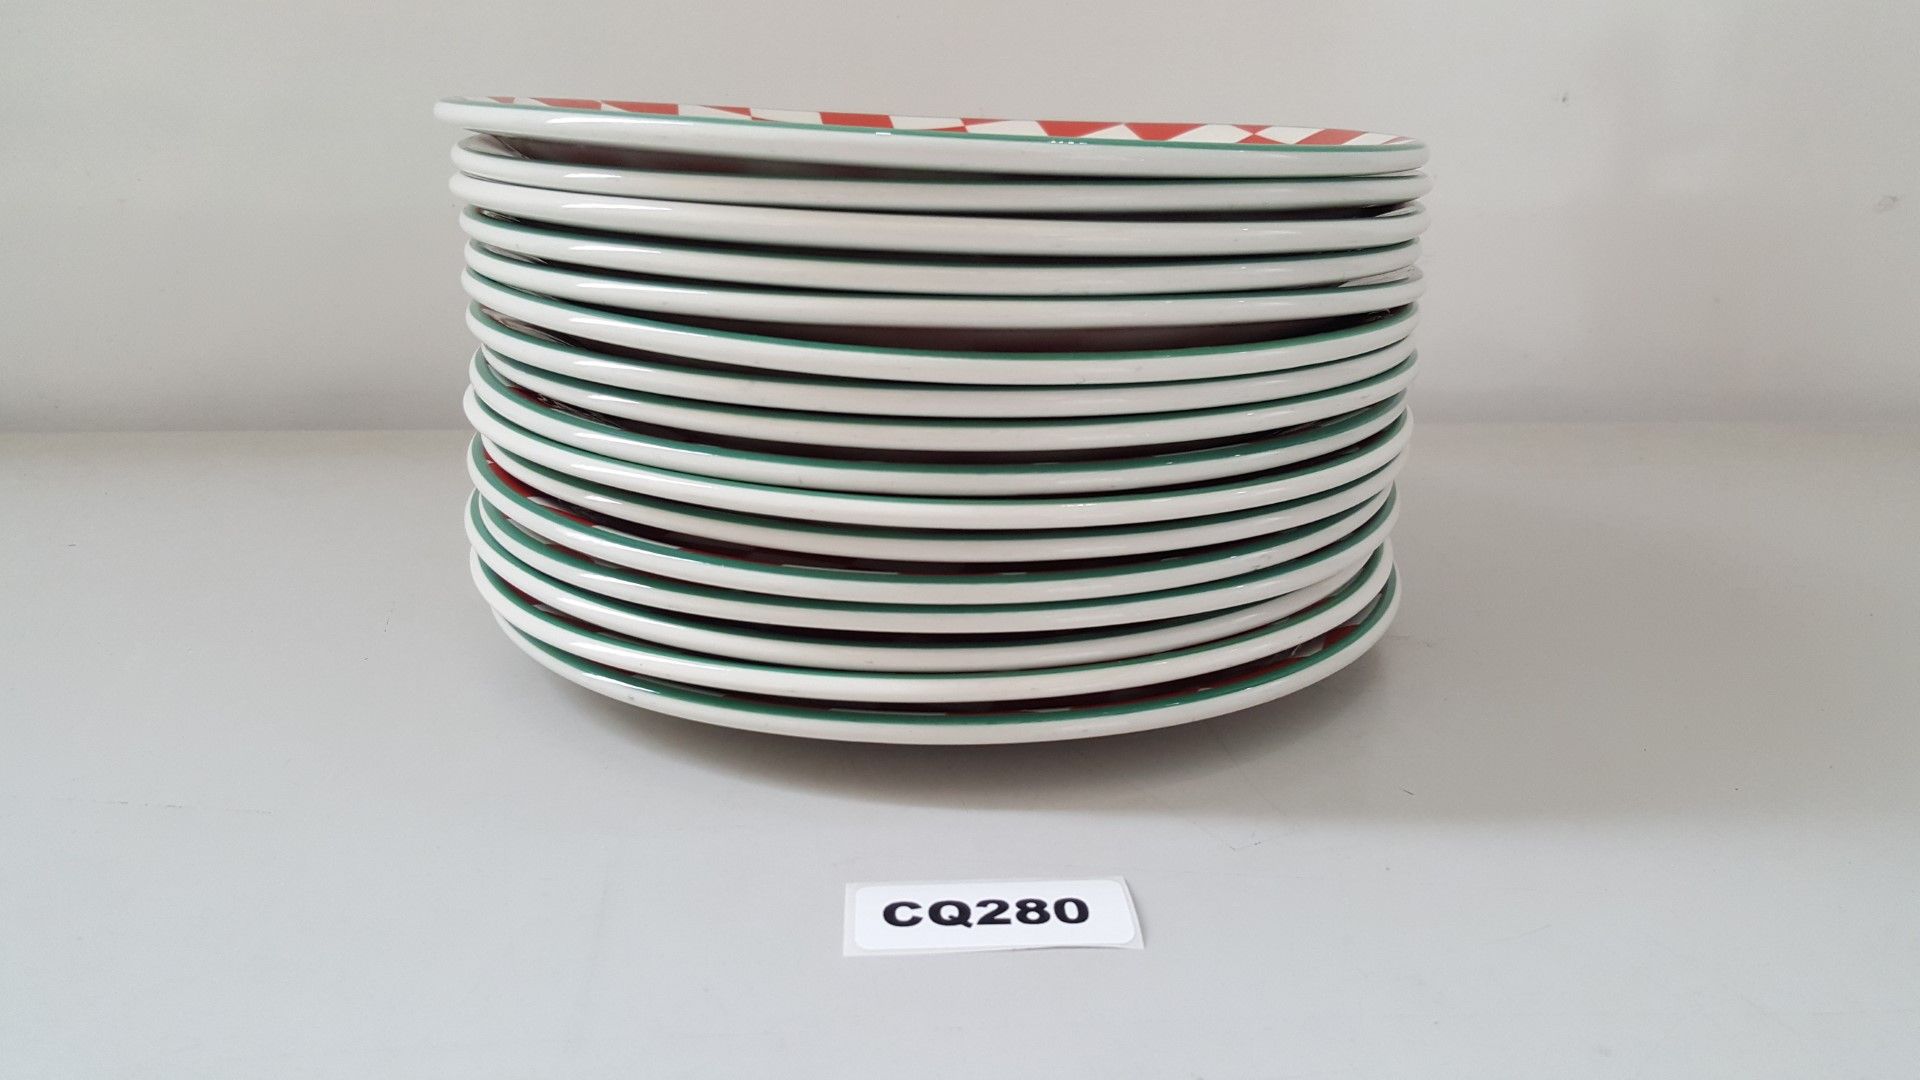 16 x Steelite Plates Checkered Red&White With Green Outline 25CM - Ref CQ280 - Image 3 of 4